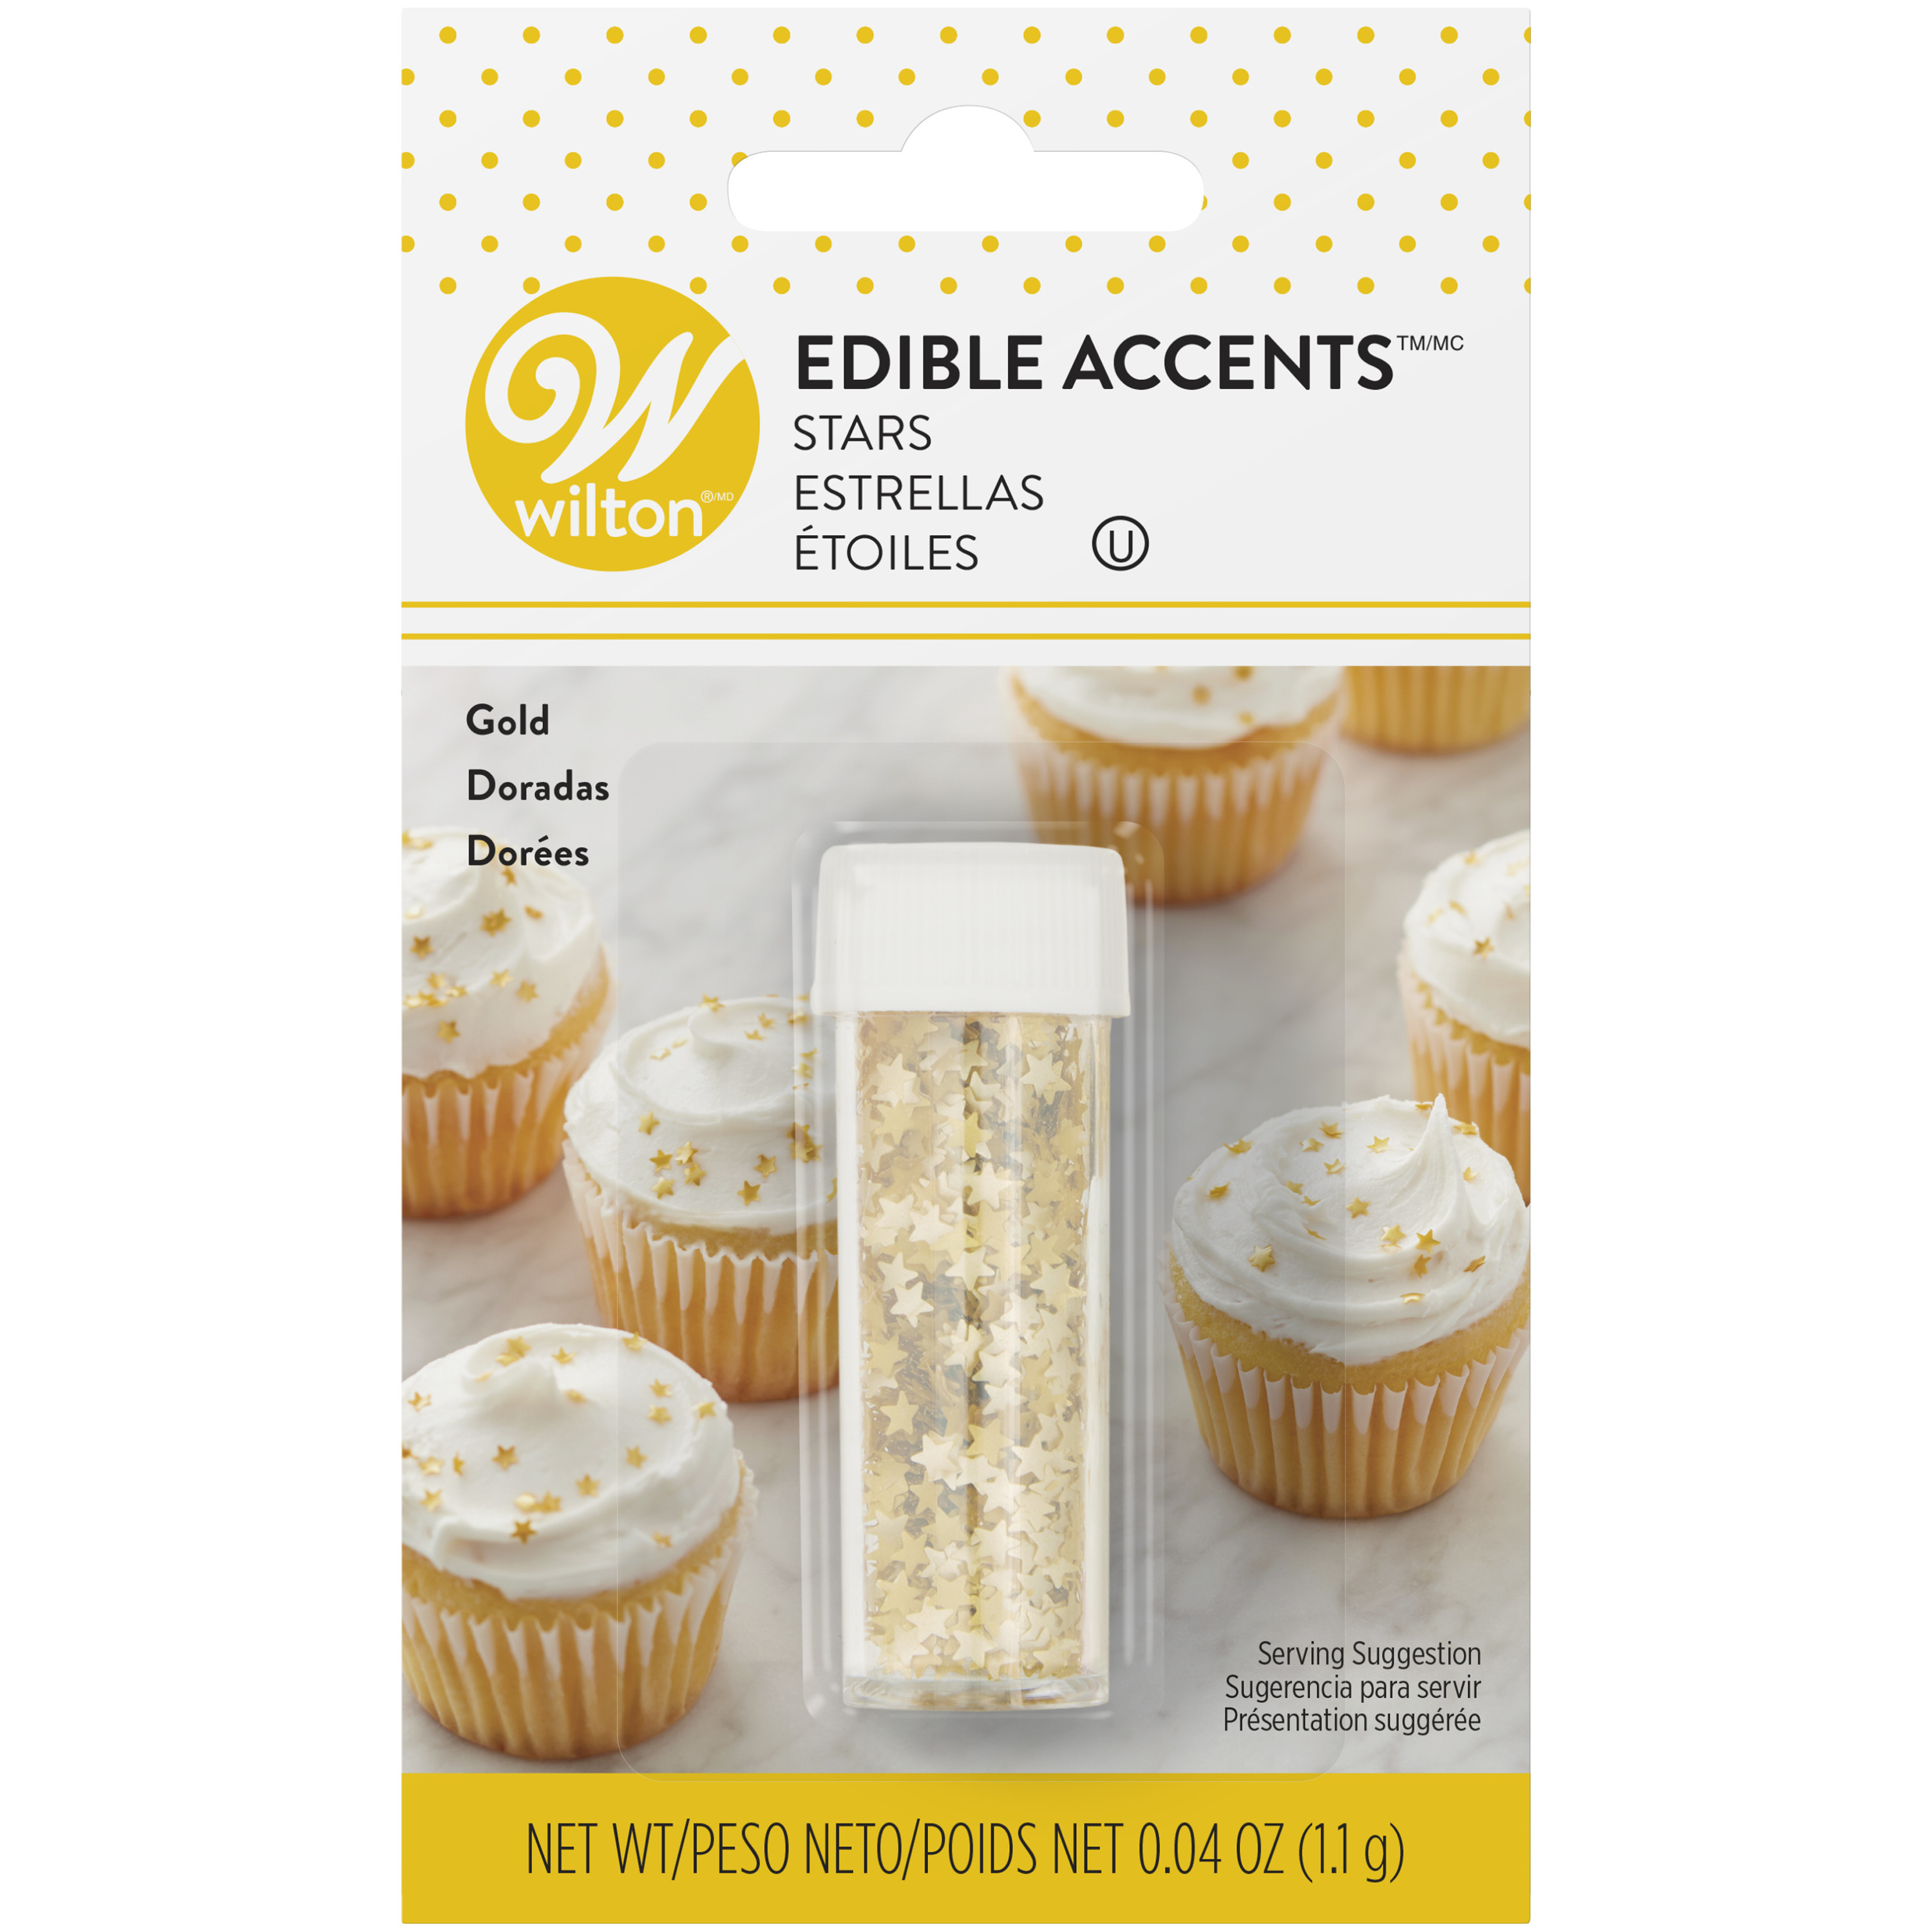 Wilton Gold Stars Edible Accents - image 1 of 9